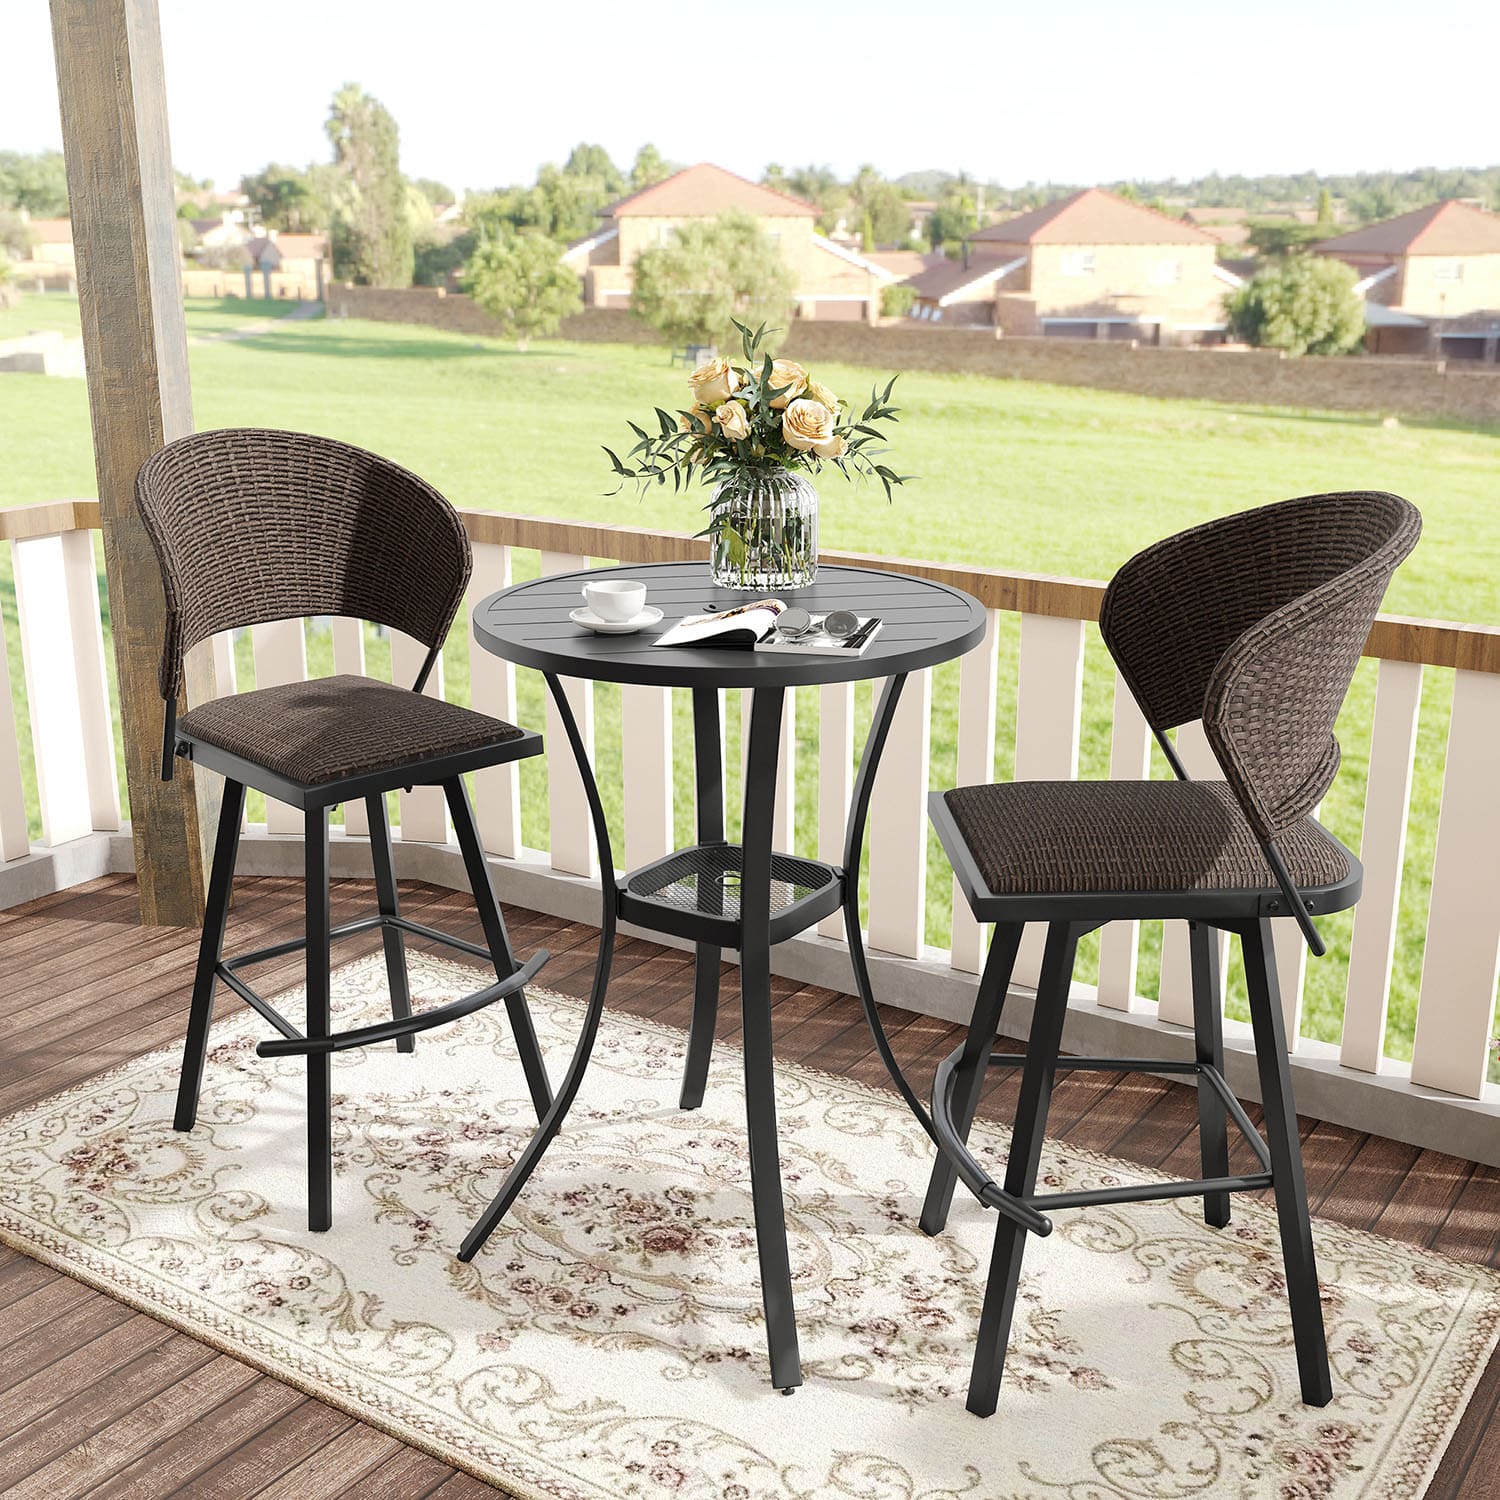 Vicllax 3/5 PCS Outdoor Swivel Bar Set, Patio Wicker Bar Chairs and Round Bar Table